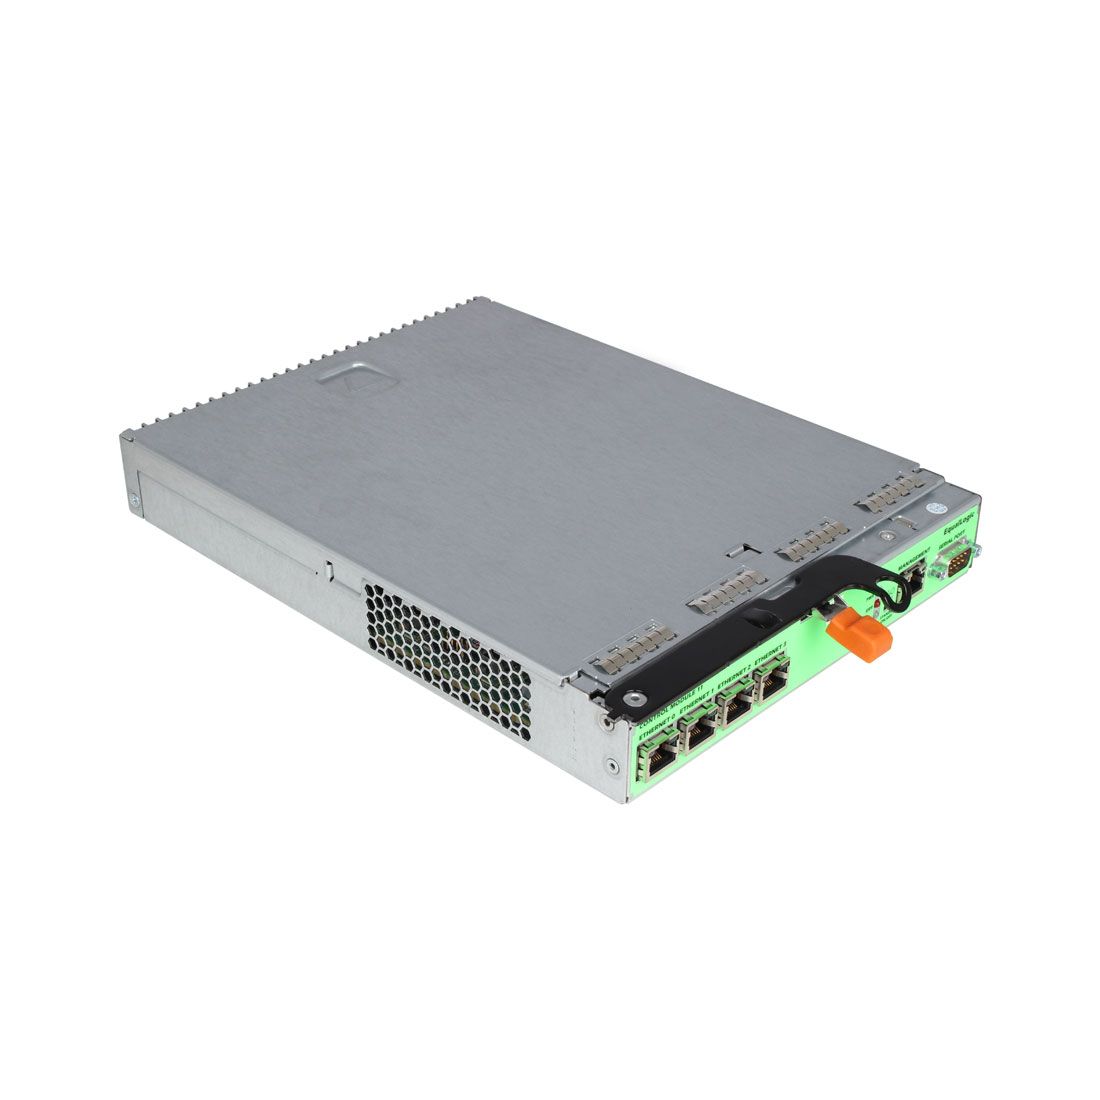 0HRT01 Dell EqualLogic PS6100 Type 11 (Green) Storage Controller Module